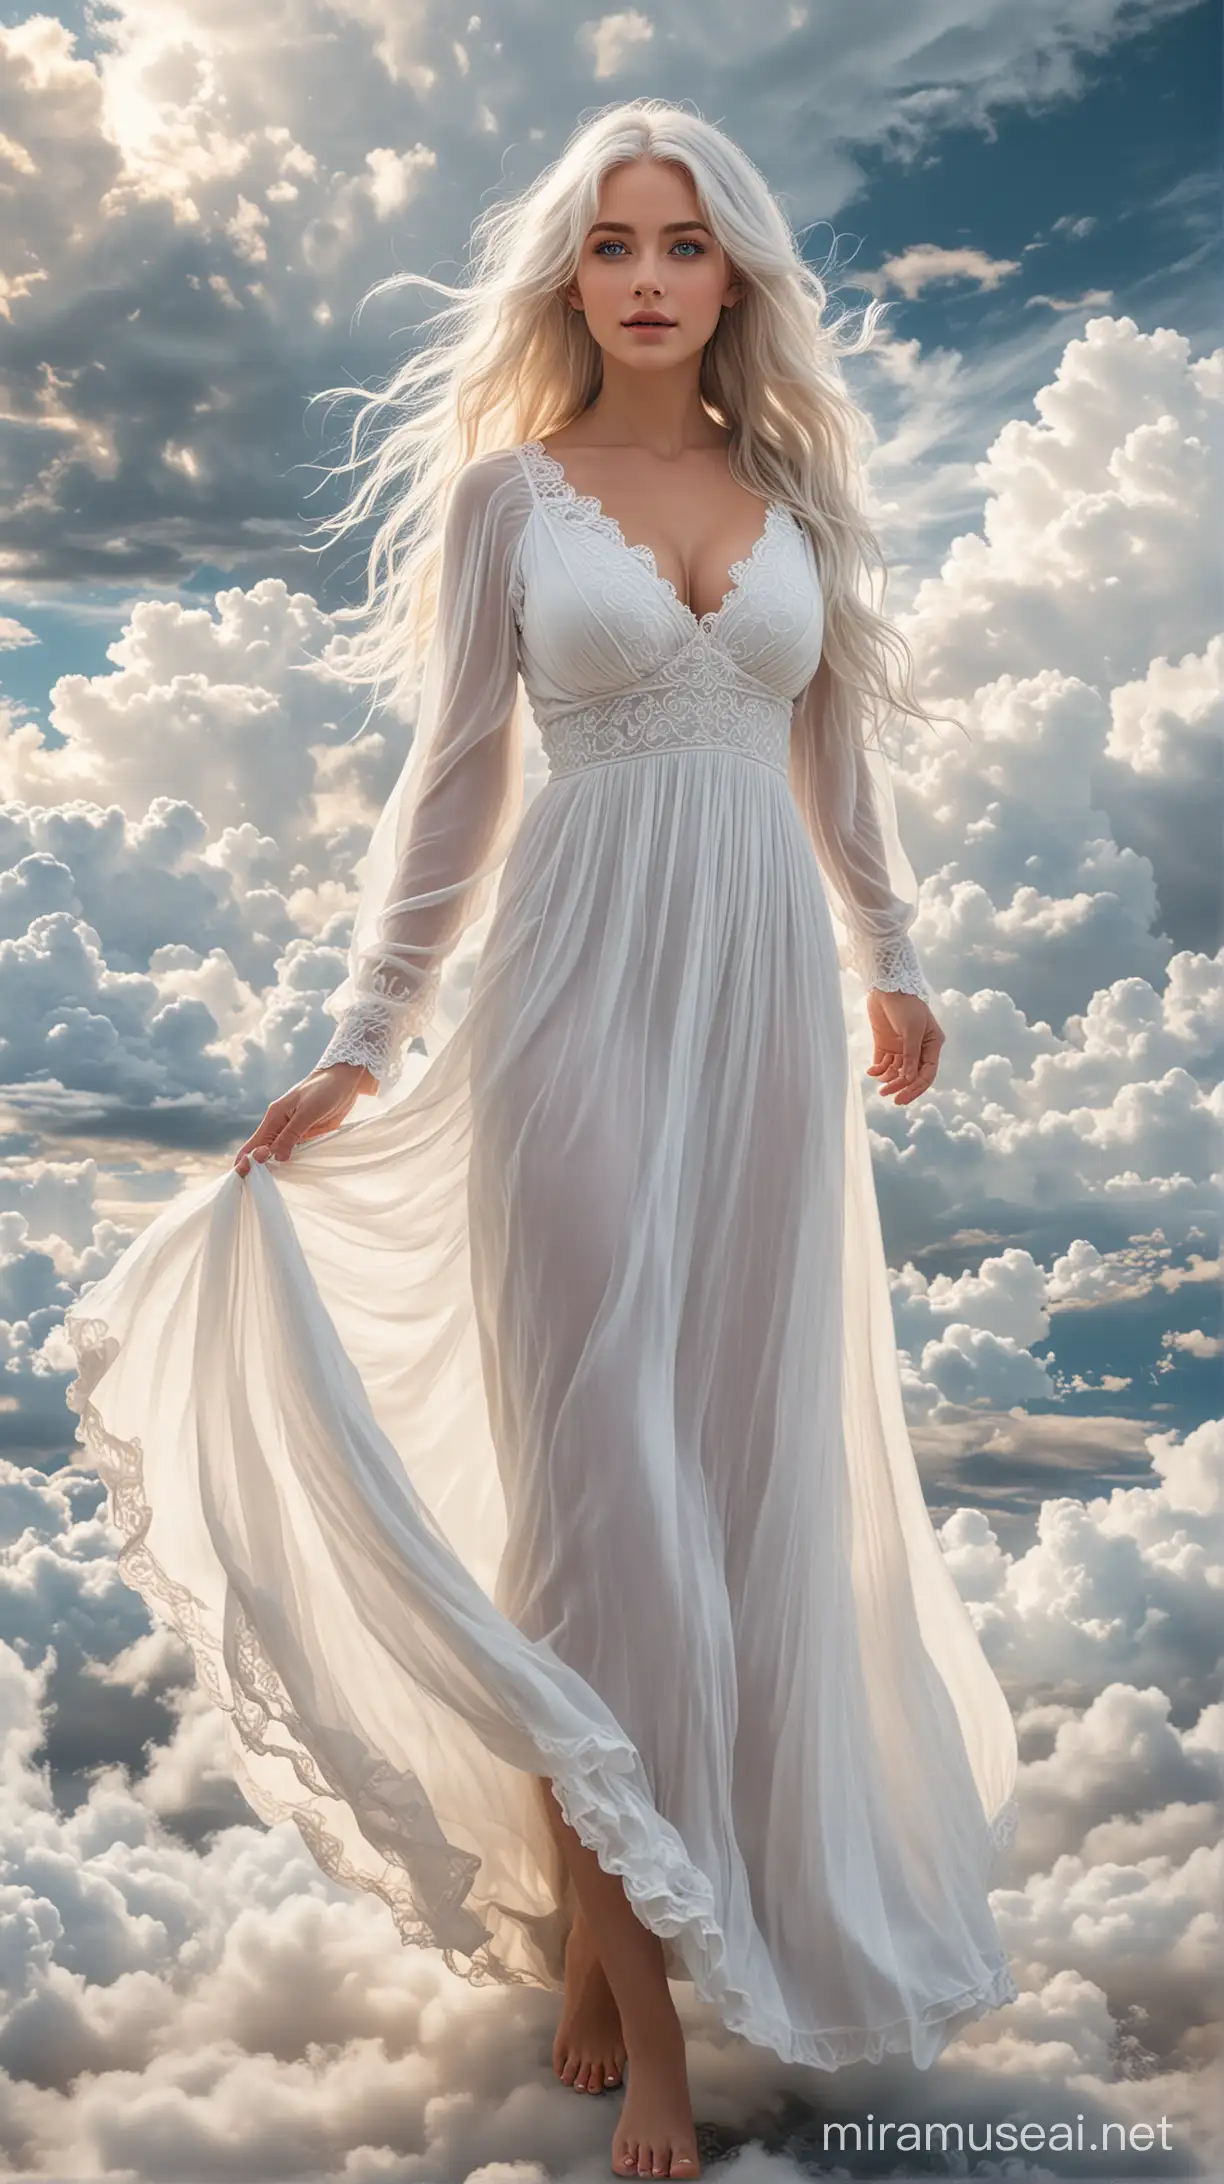 A GORGEOUS woman with long white hair, blue eyes, a sweet face, and a nice figure with big tits walking on clouds in a flowing white dress. The image must show the total body, including the feet.